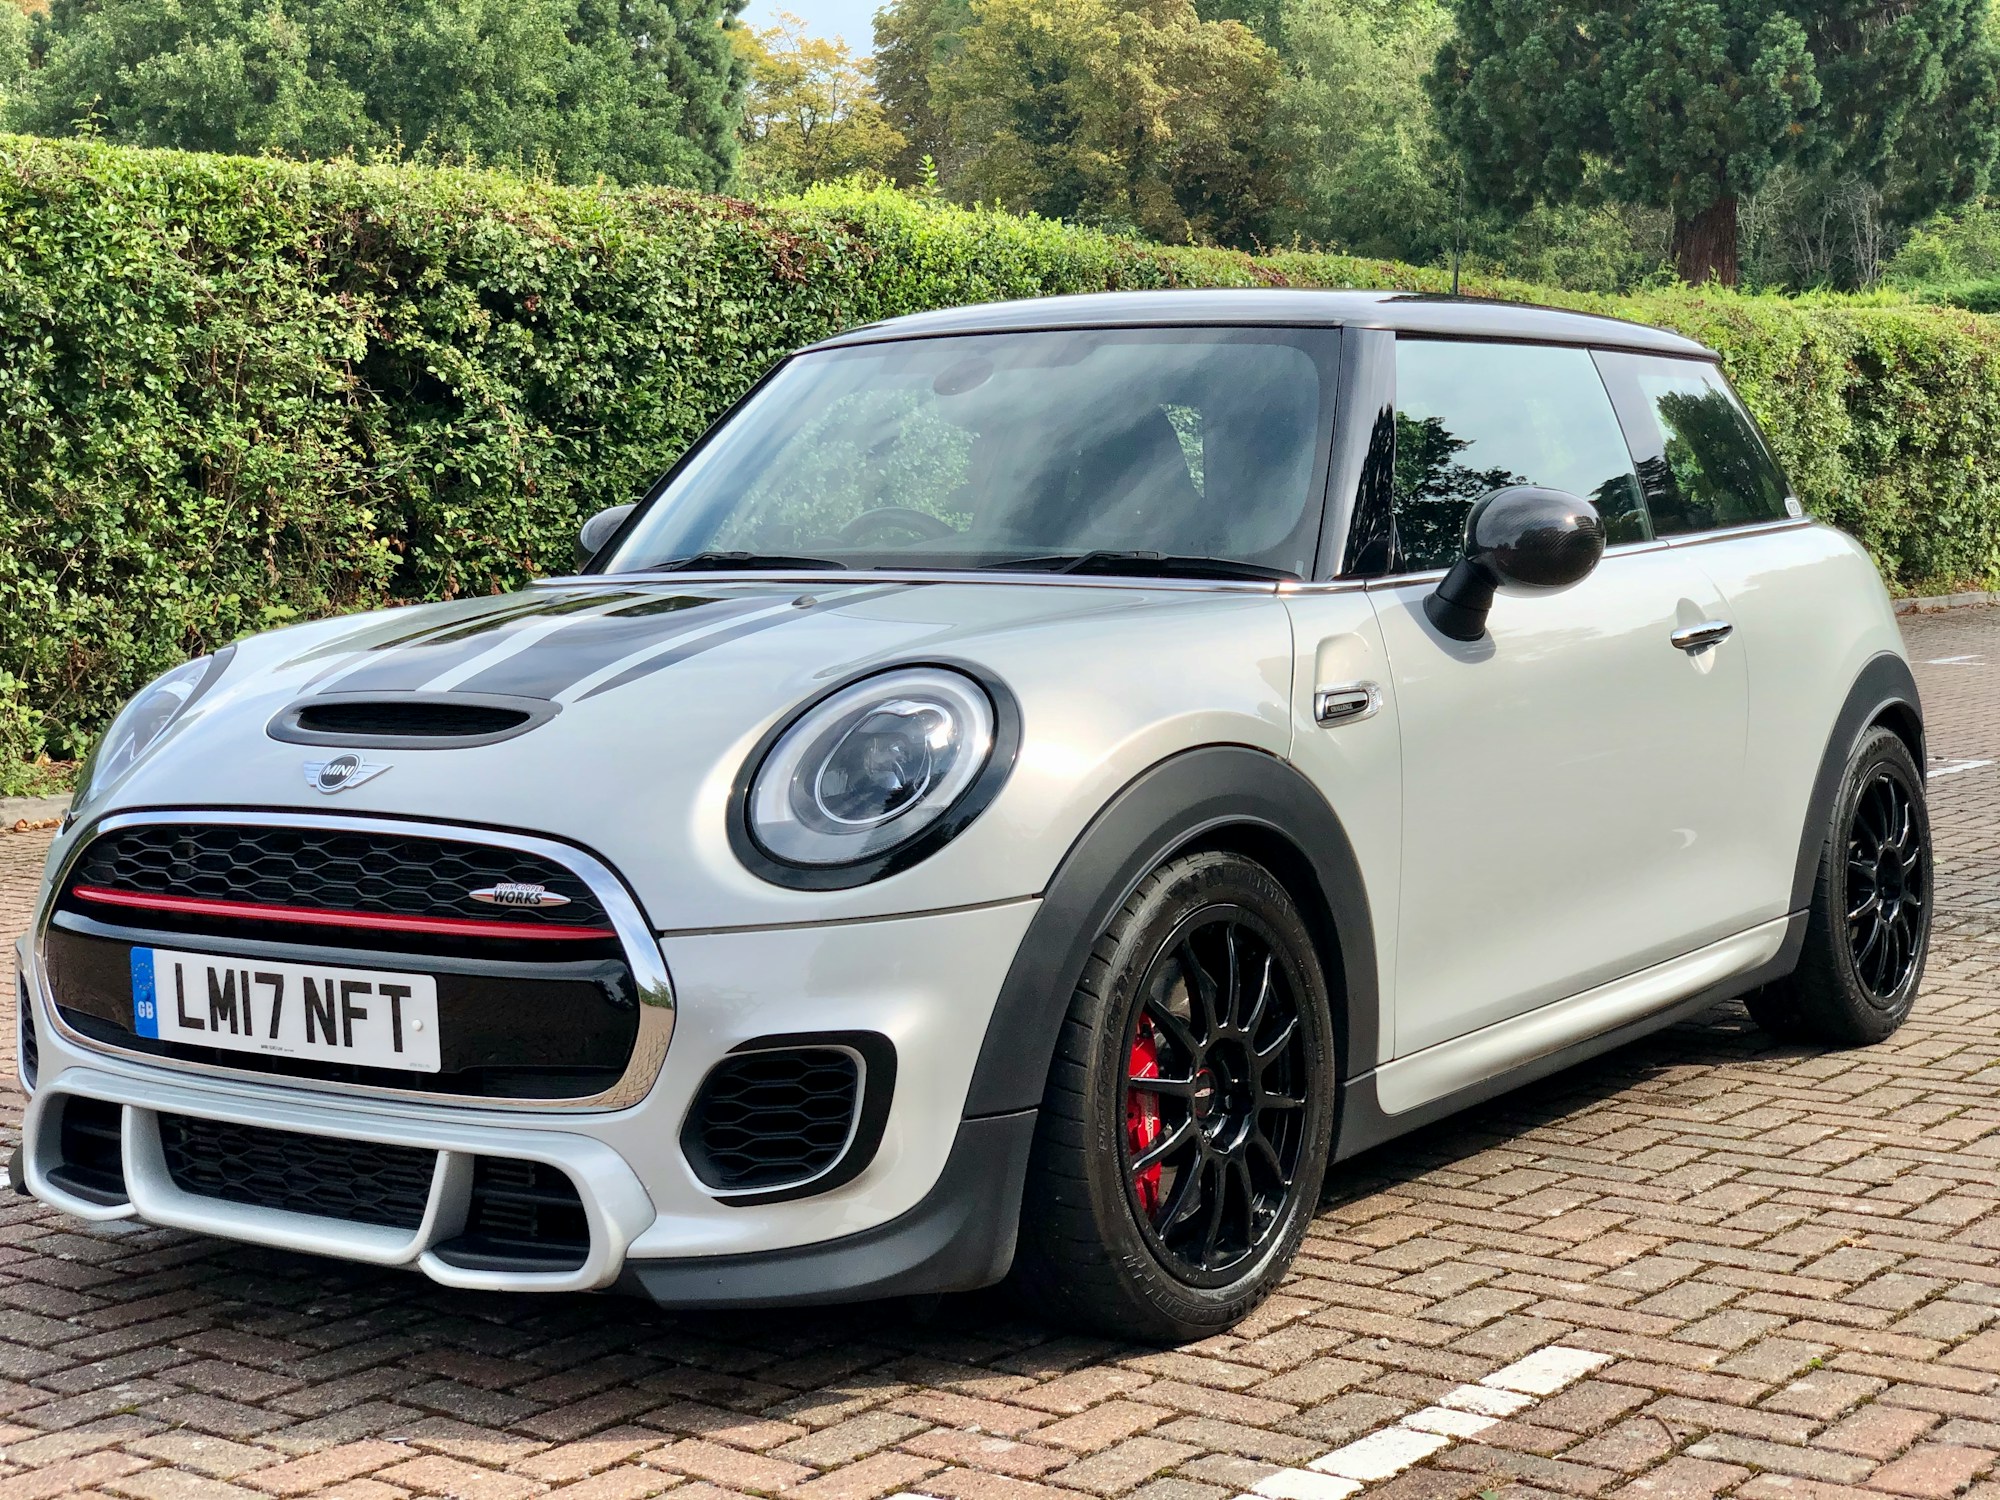 2017 MINI JOHN COOPER WORKS CHALLENGE #53 for sale by auction in ...